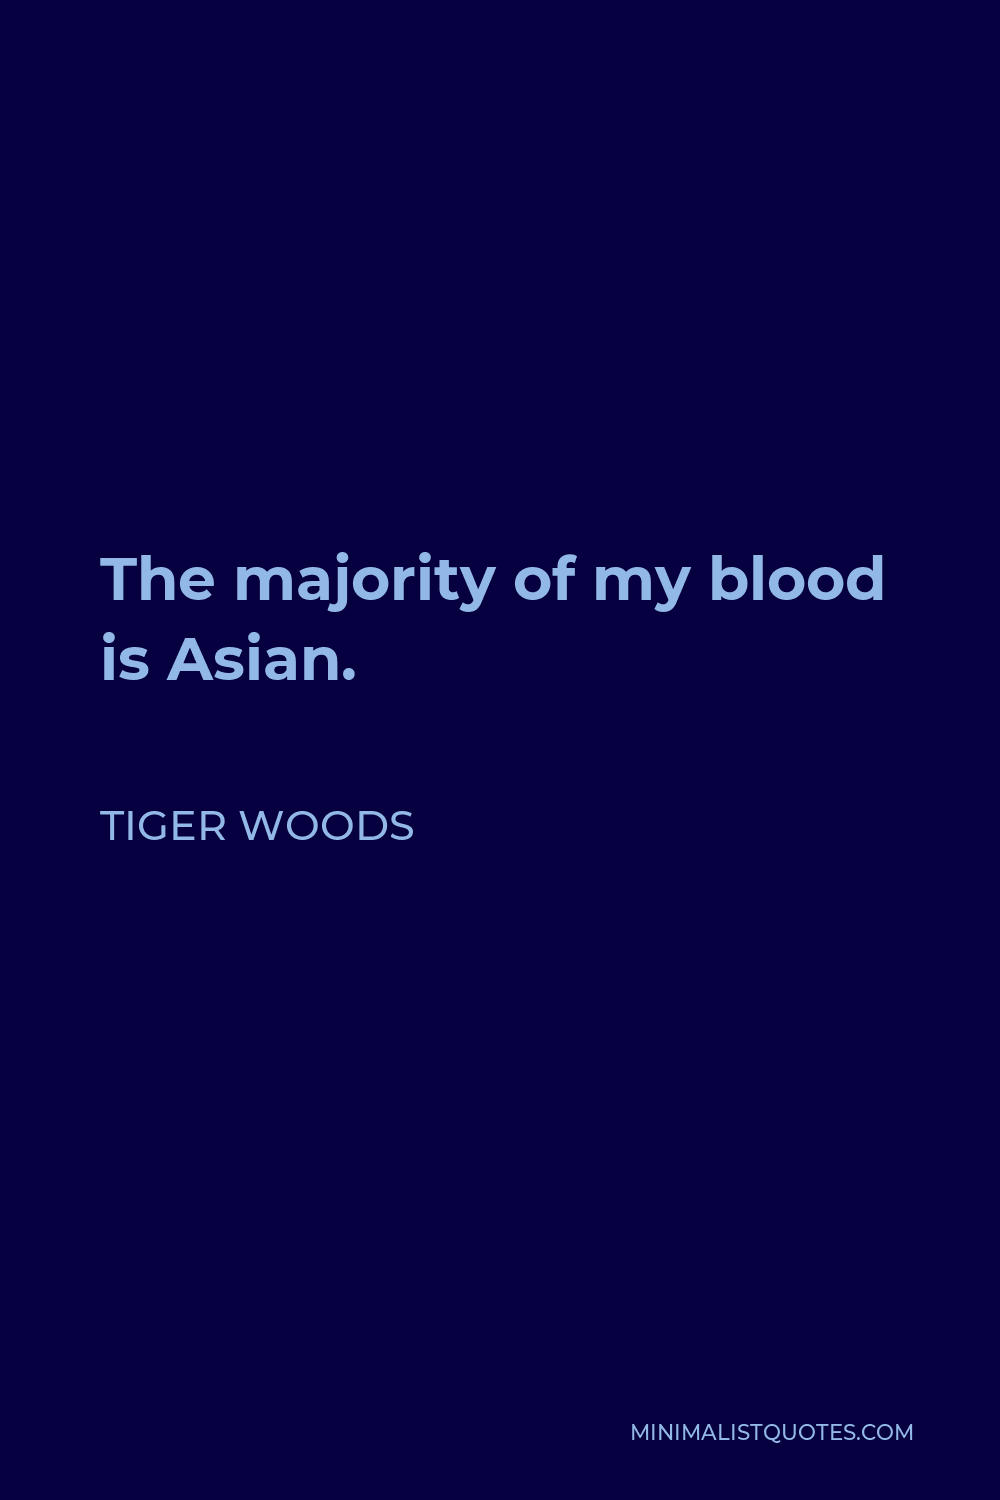 Tiger Woods Quote - The majority of my blood is Asian.